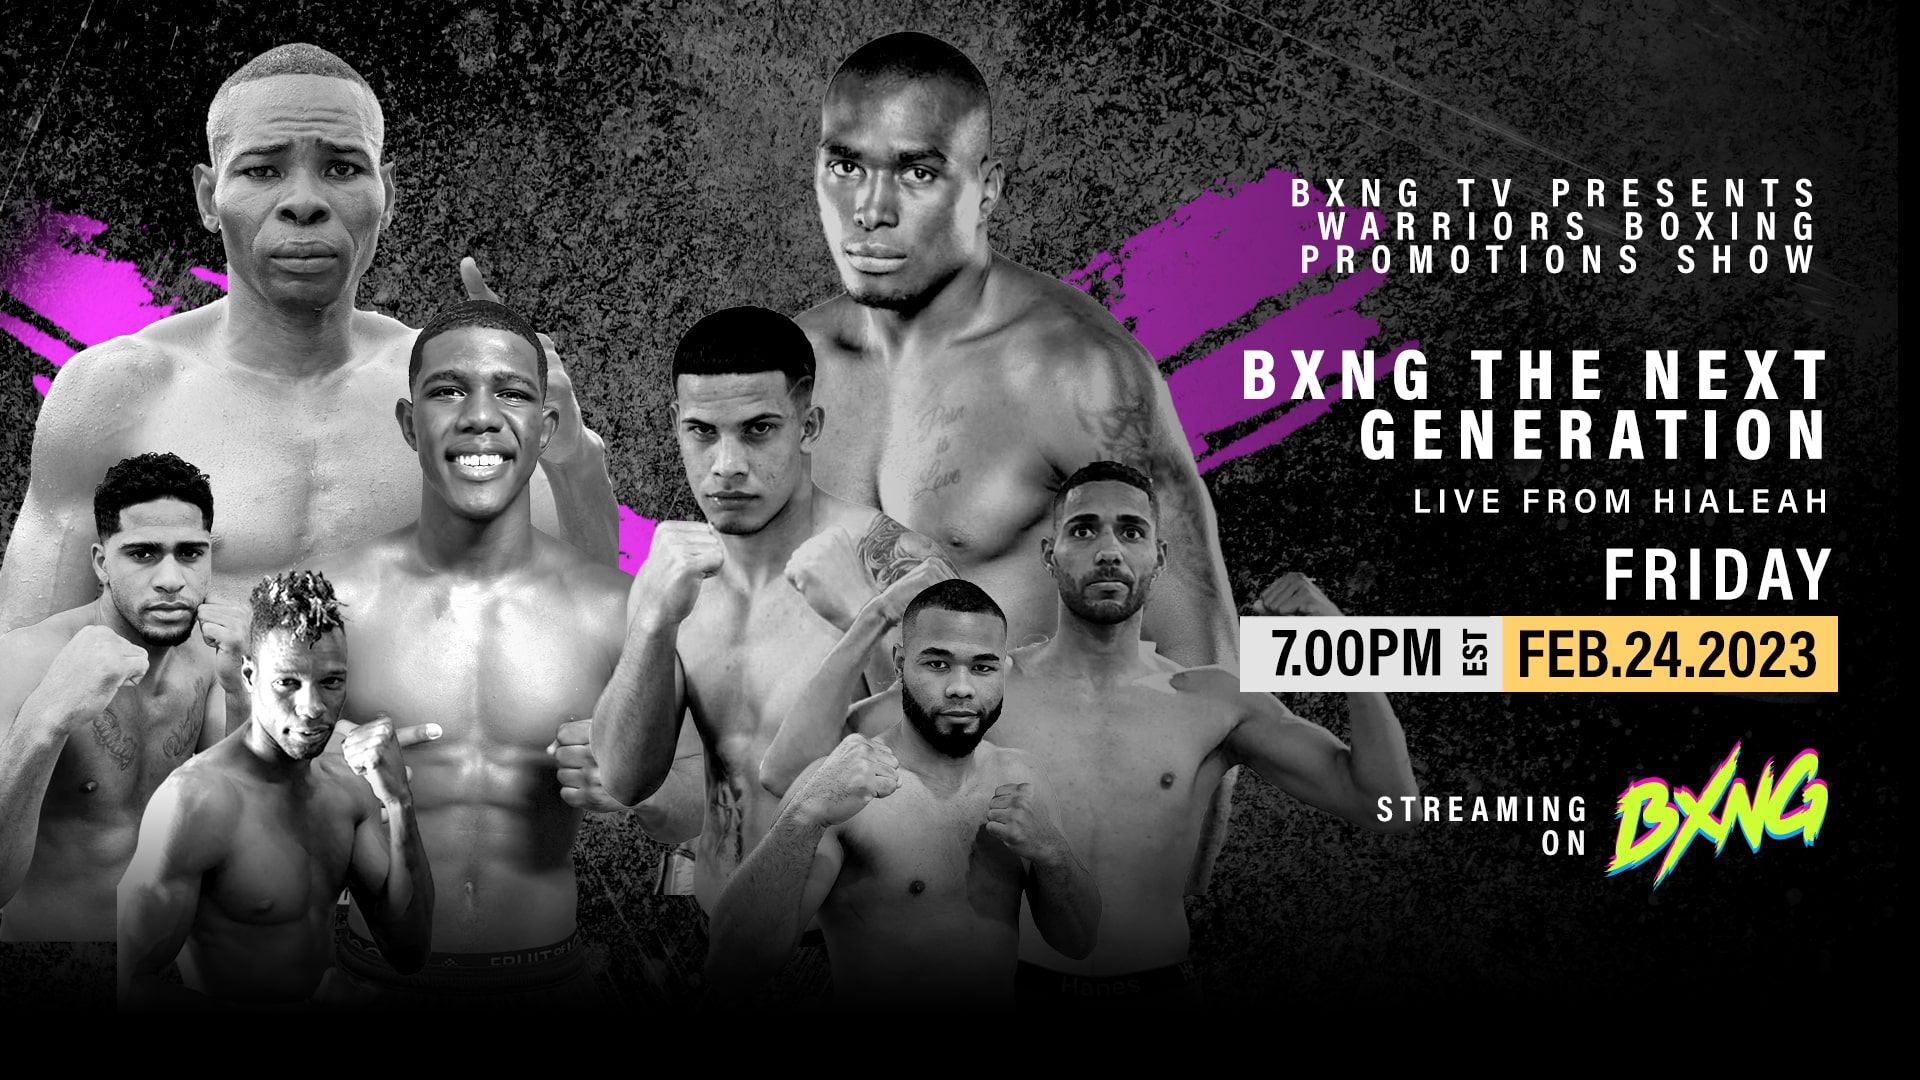 BXNG TV Presents Warriors Boxing Promotions Show Live Stream 02-24-23